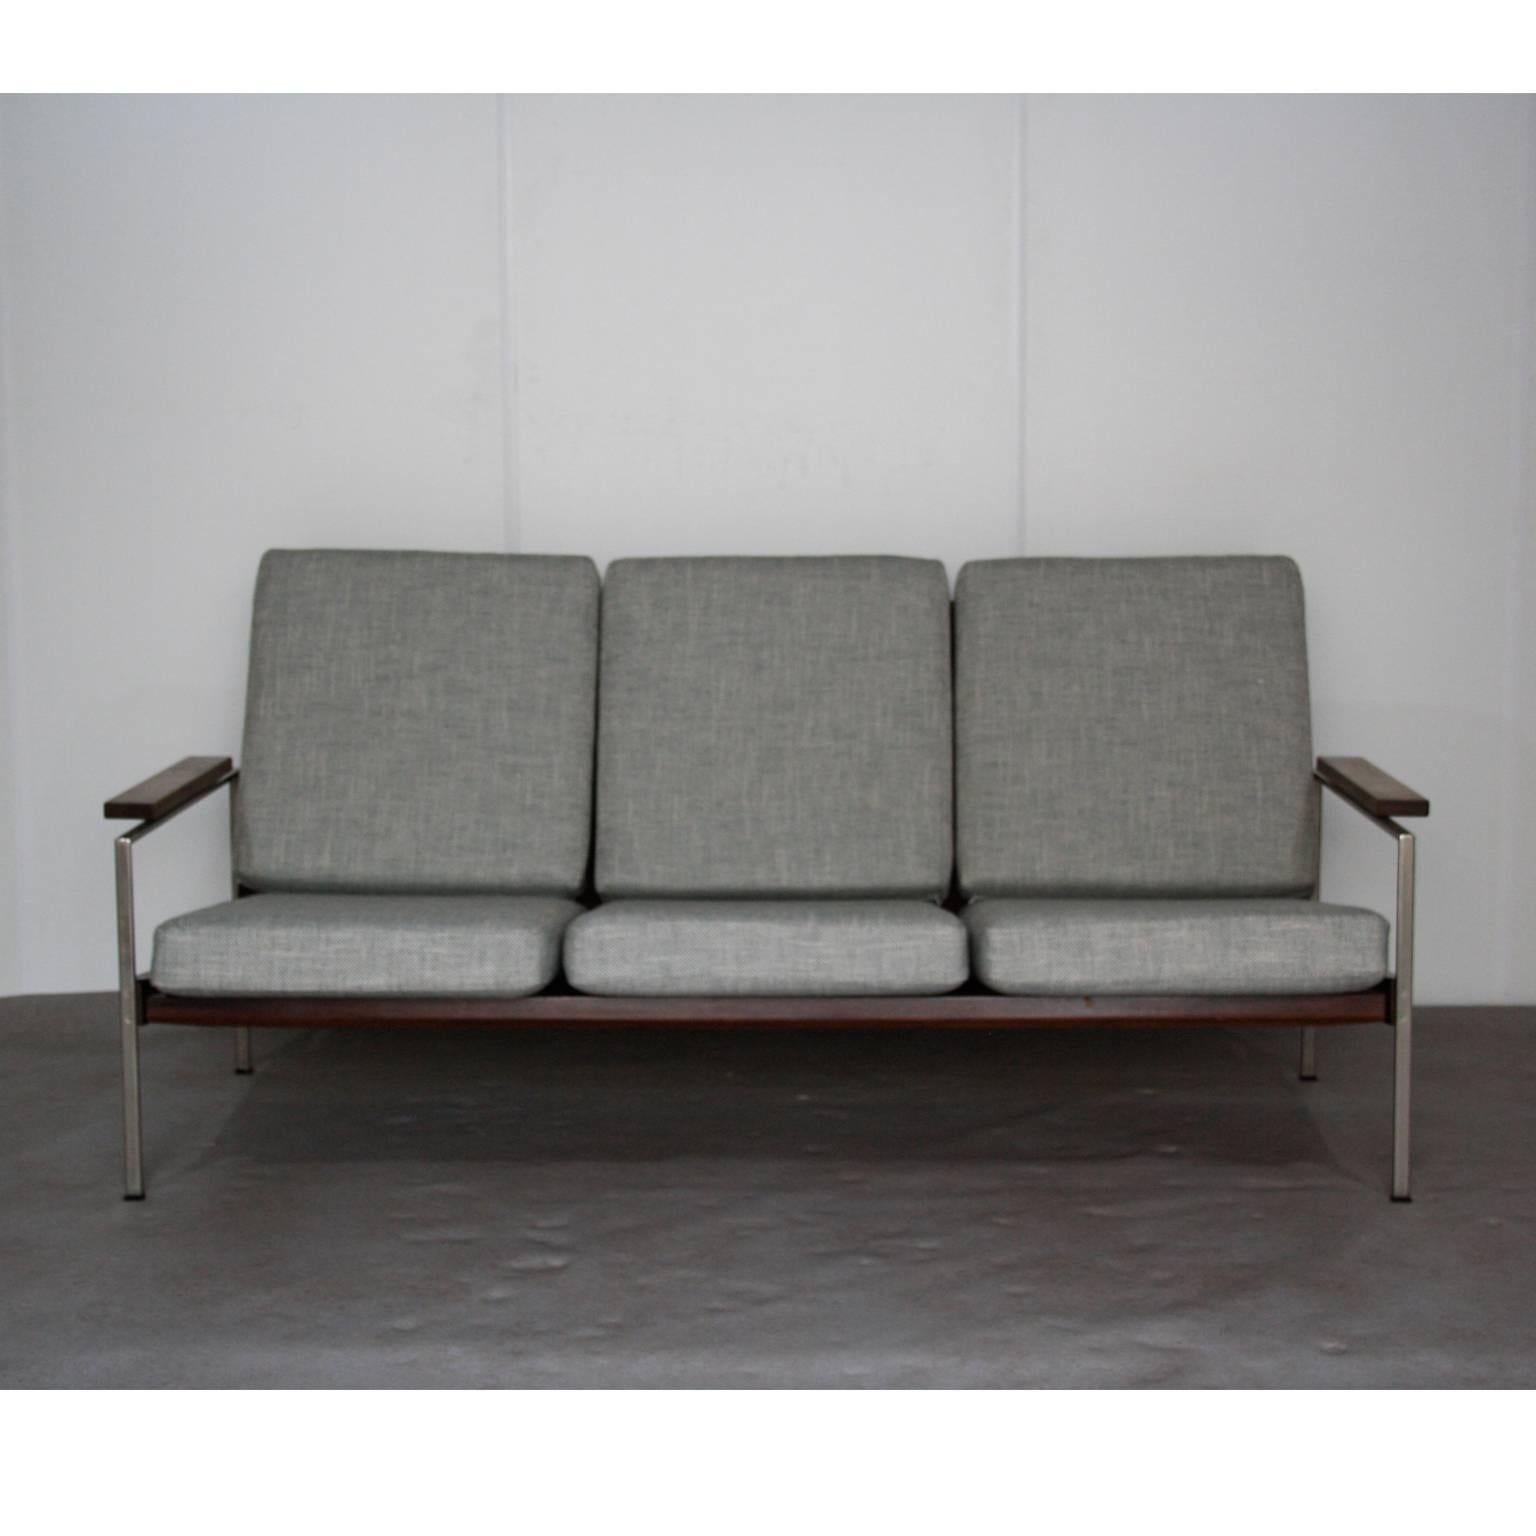 Beautiful minimalistic sofa by Rob Parry for Gelderland, Netherlands, 1960s

Wood and metal frame. The sofa has new grey-blue upholstery and is in good vintage condition.